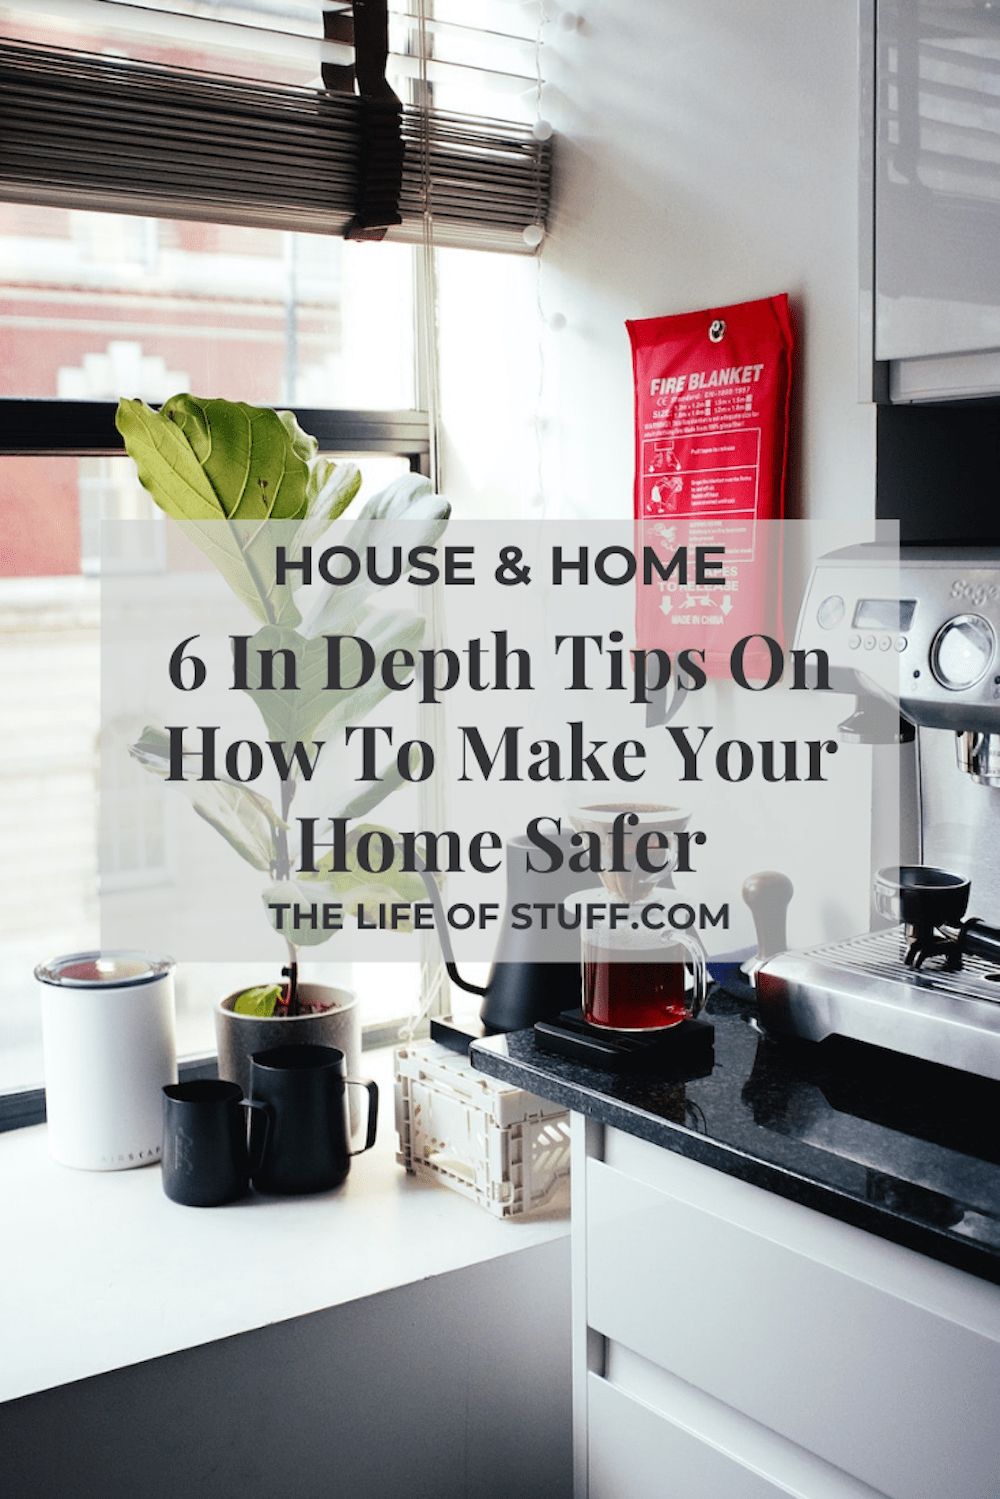 6 In Depth Tips On How To Make Your Home Safer - The Life of Stuff